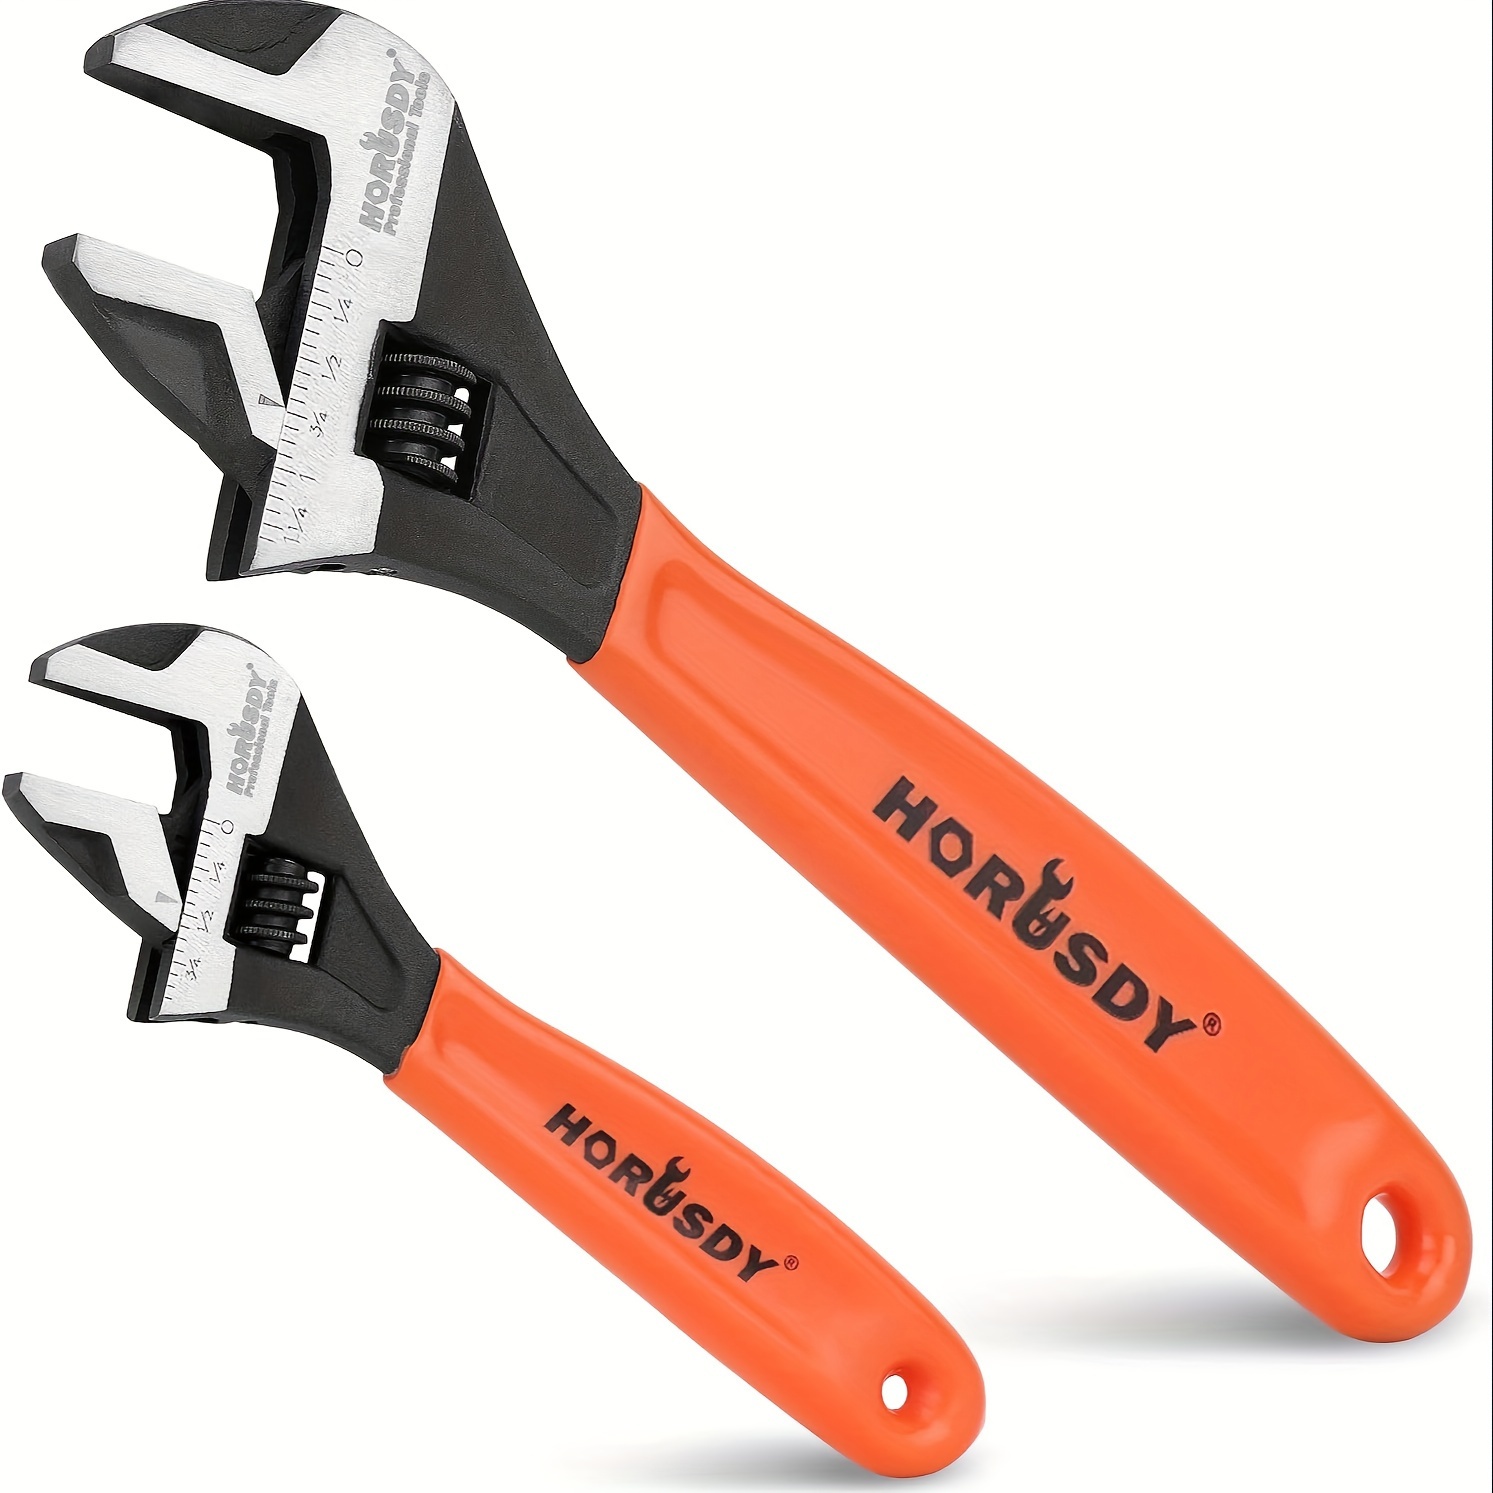 

Horusdy 2-piece Adjustable Wrench Set - 6-inch & 10-inch Crescent Wrench With Cushion Grip Handles, Metric & Sae Scales, Durable Chrome Vanadium Steel Construction